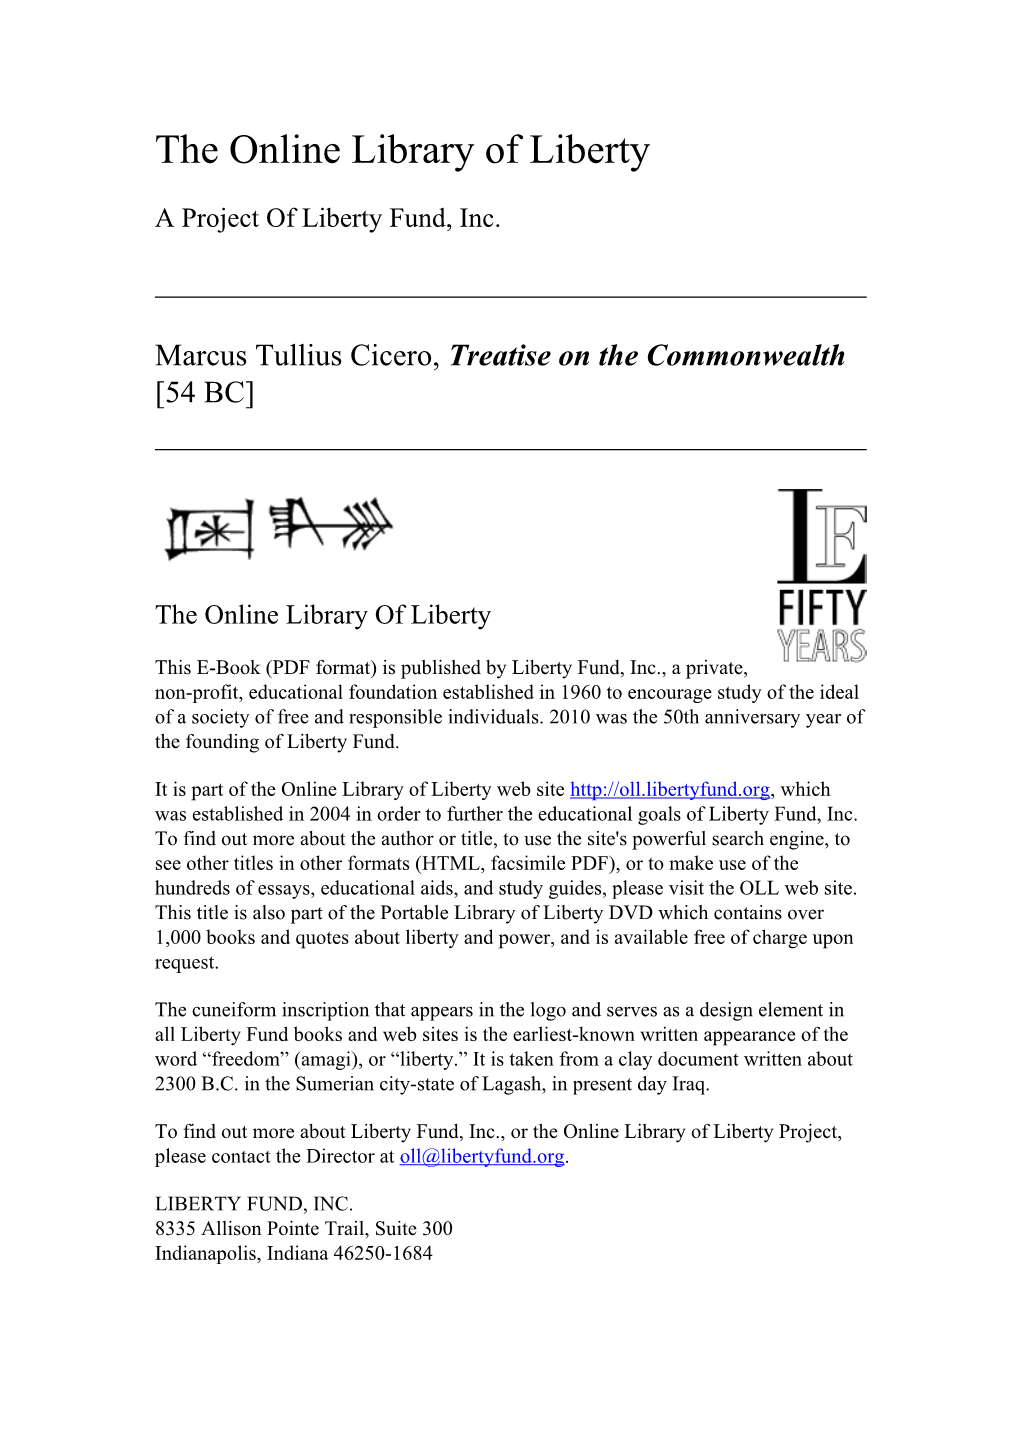 Online Library of Liberty: Treatise on the Commonwealth